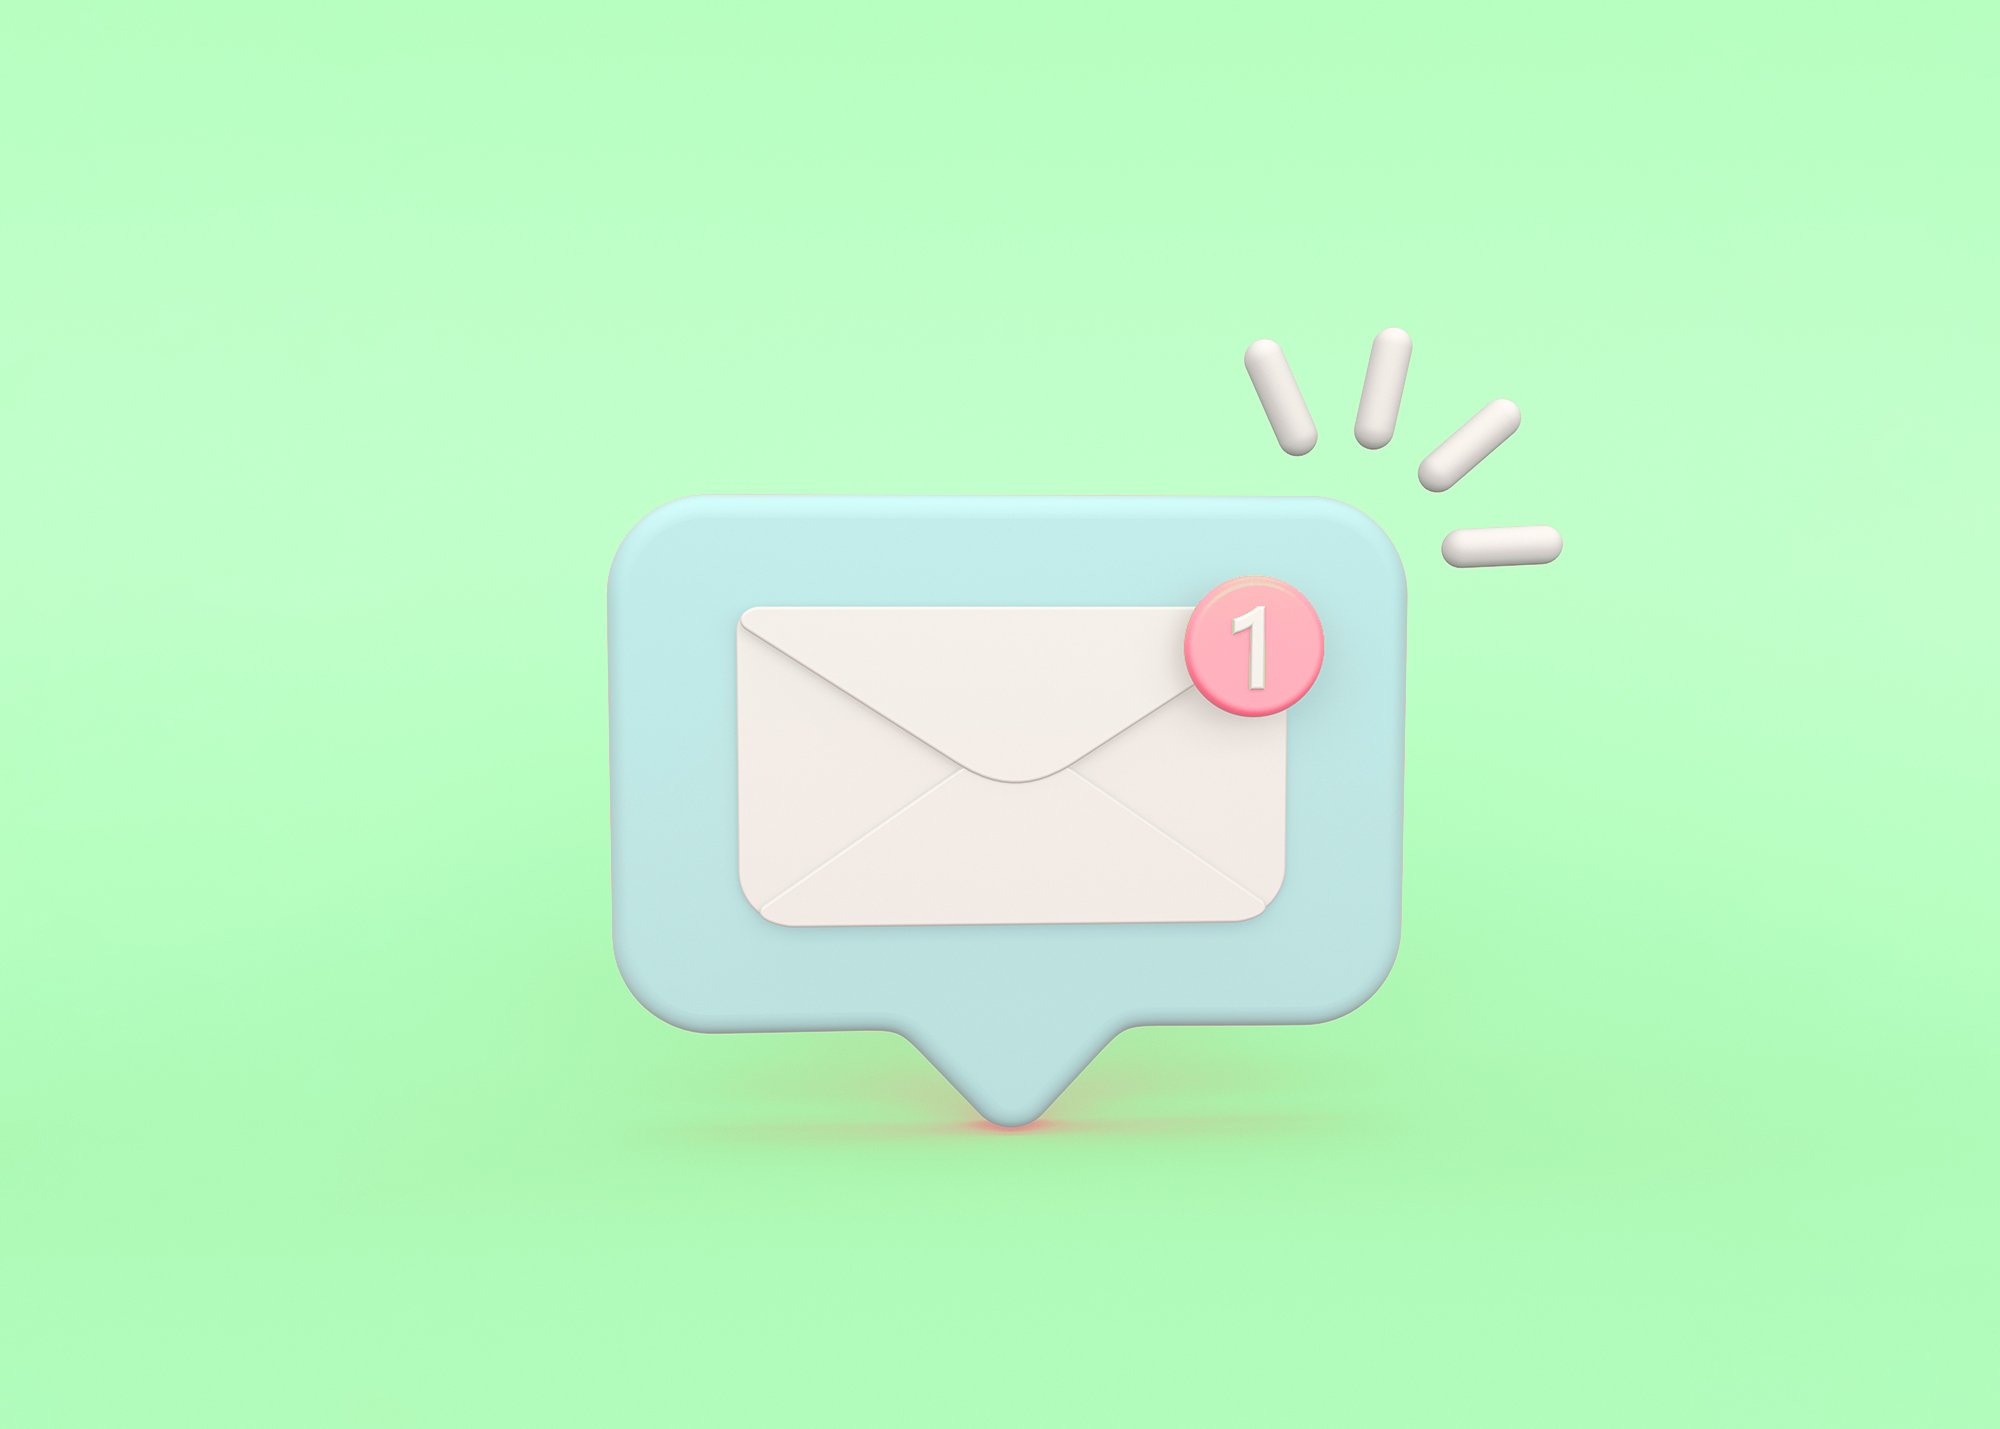 Discover the Intent behind the Email Marketing